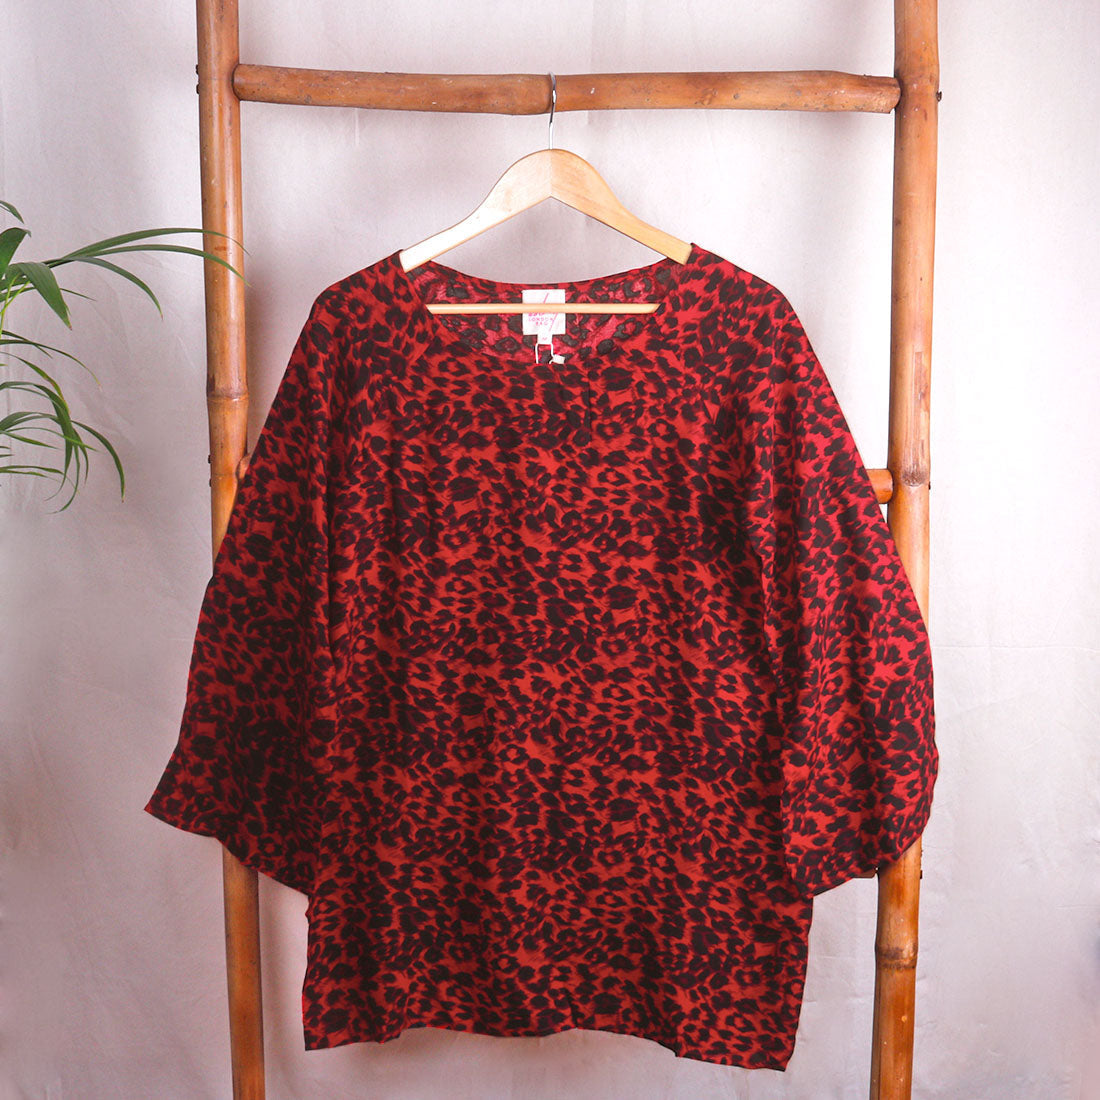 Casual Full Sleeve Printed Red Top